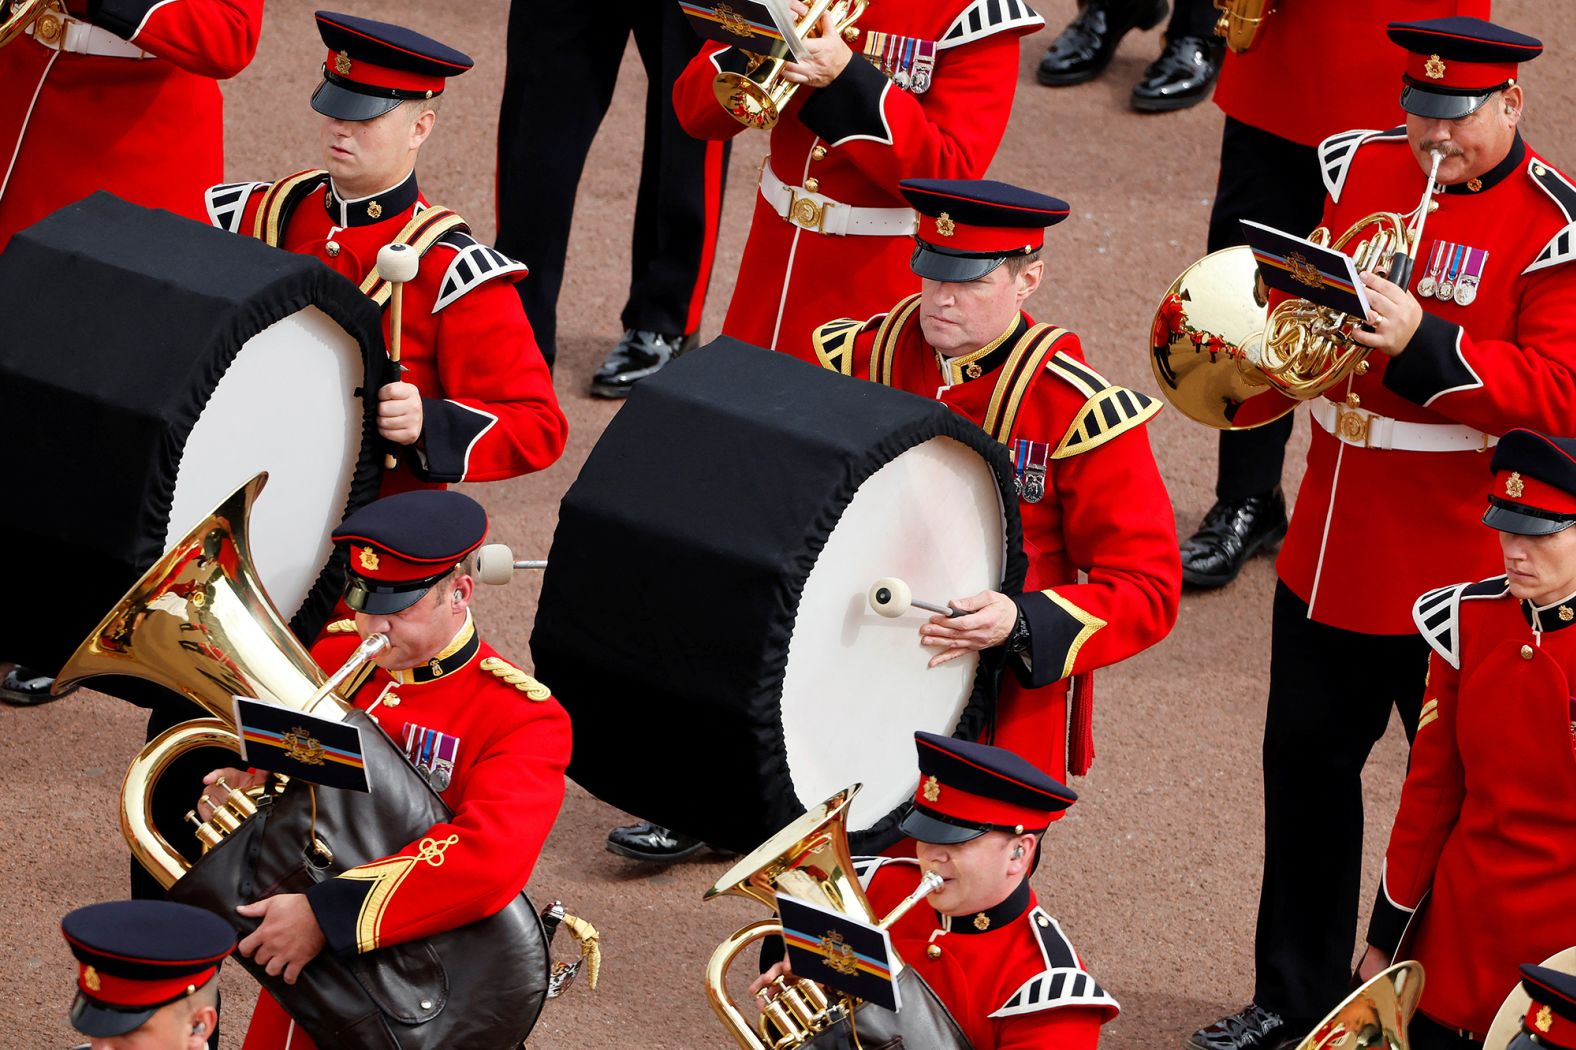 The Band of the Coldstream Guards plays in London on Monday.